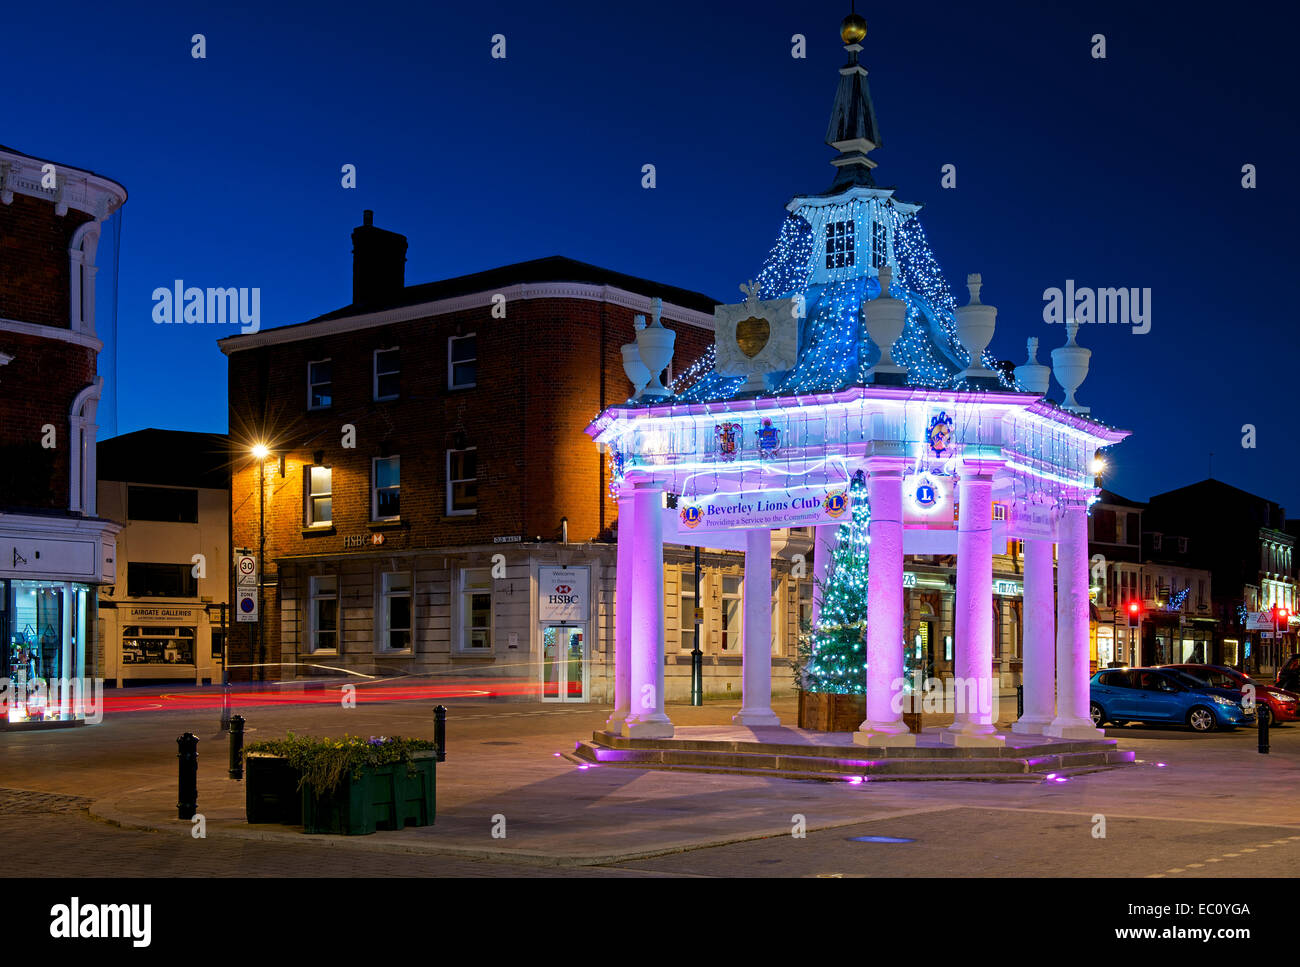 Beverley town centre at dusk, Humberside, East Yorkshire, England UK Stock Photo